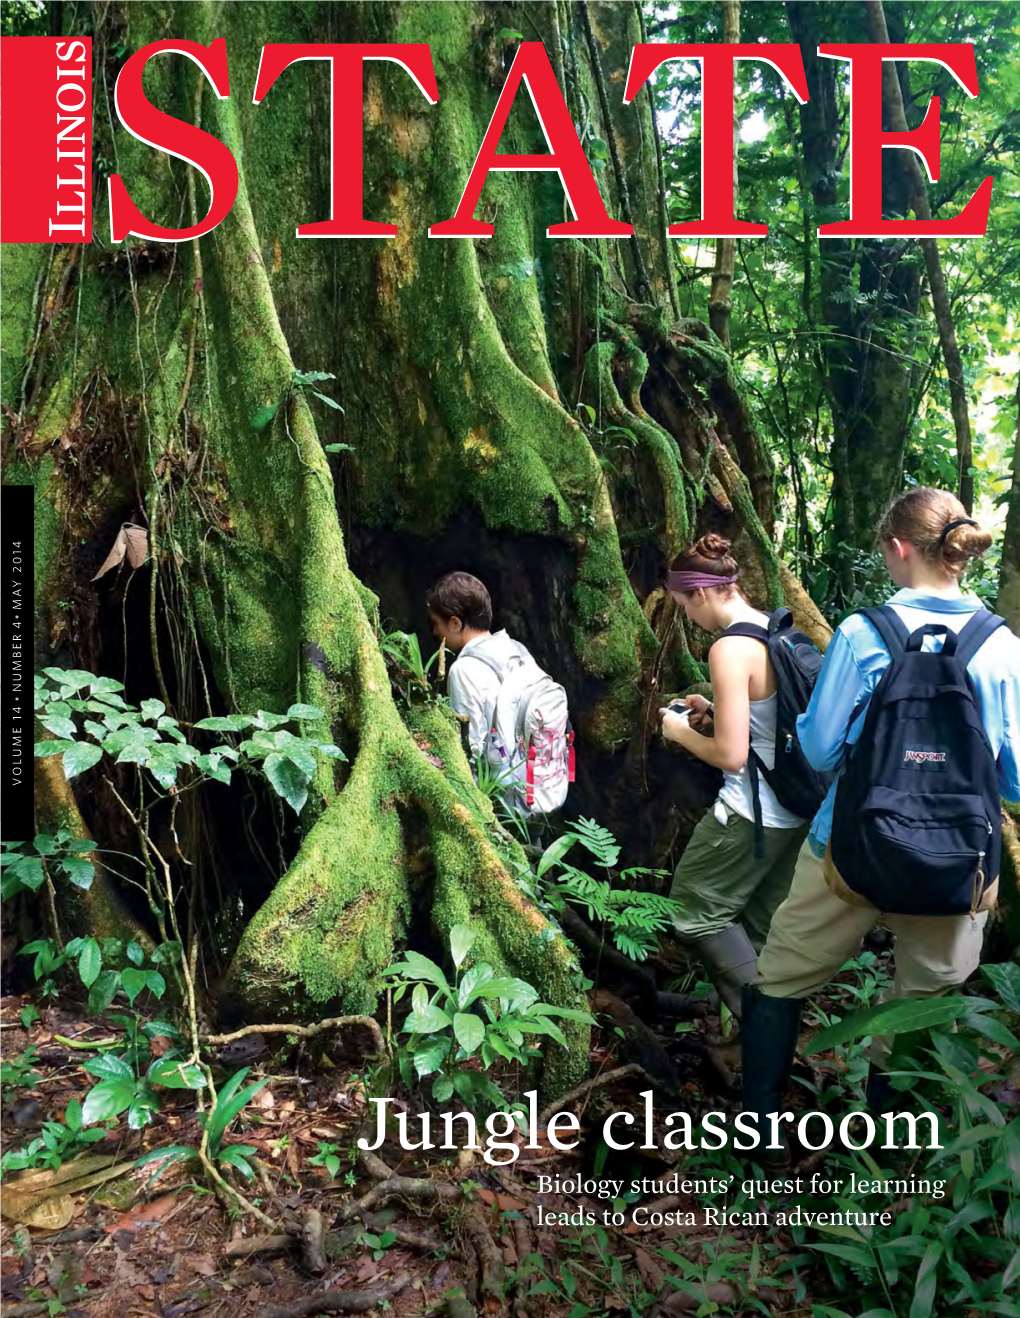 Jungle Classroom Biology Students’ Quest for Learning Leads to Costa Rican Adventure EDITOR-IN-CHIEF Susan Marquardt Blystone ’84, M.S